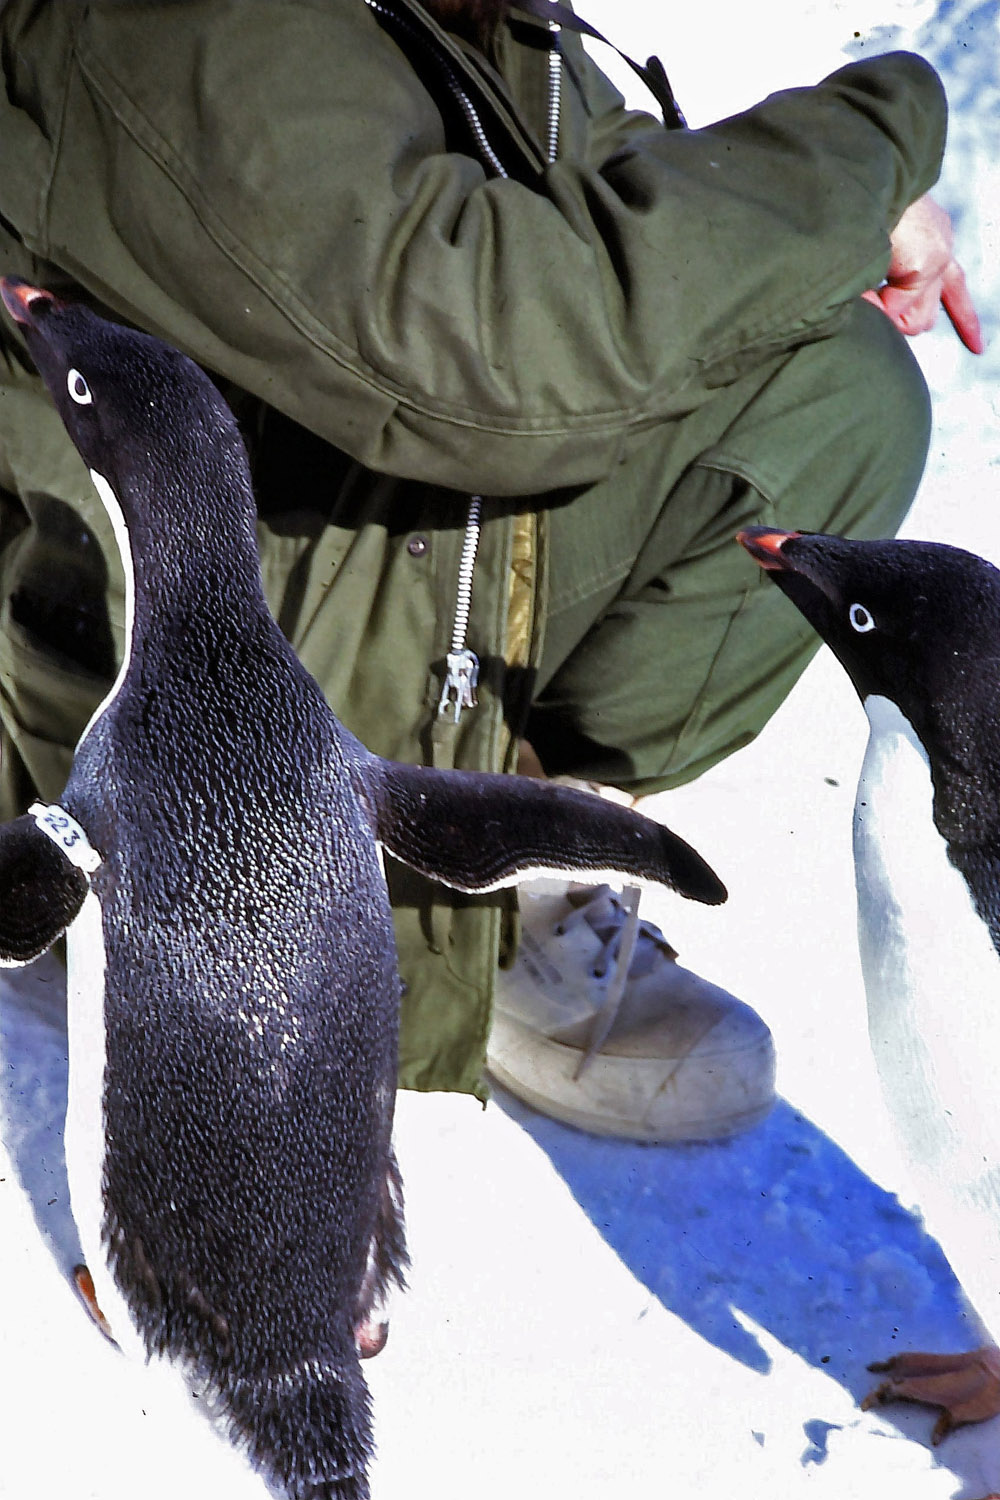 The friendly and inquisitive (but smelly) Adelie penguins